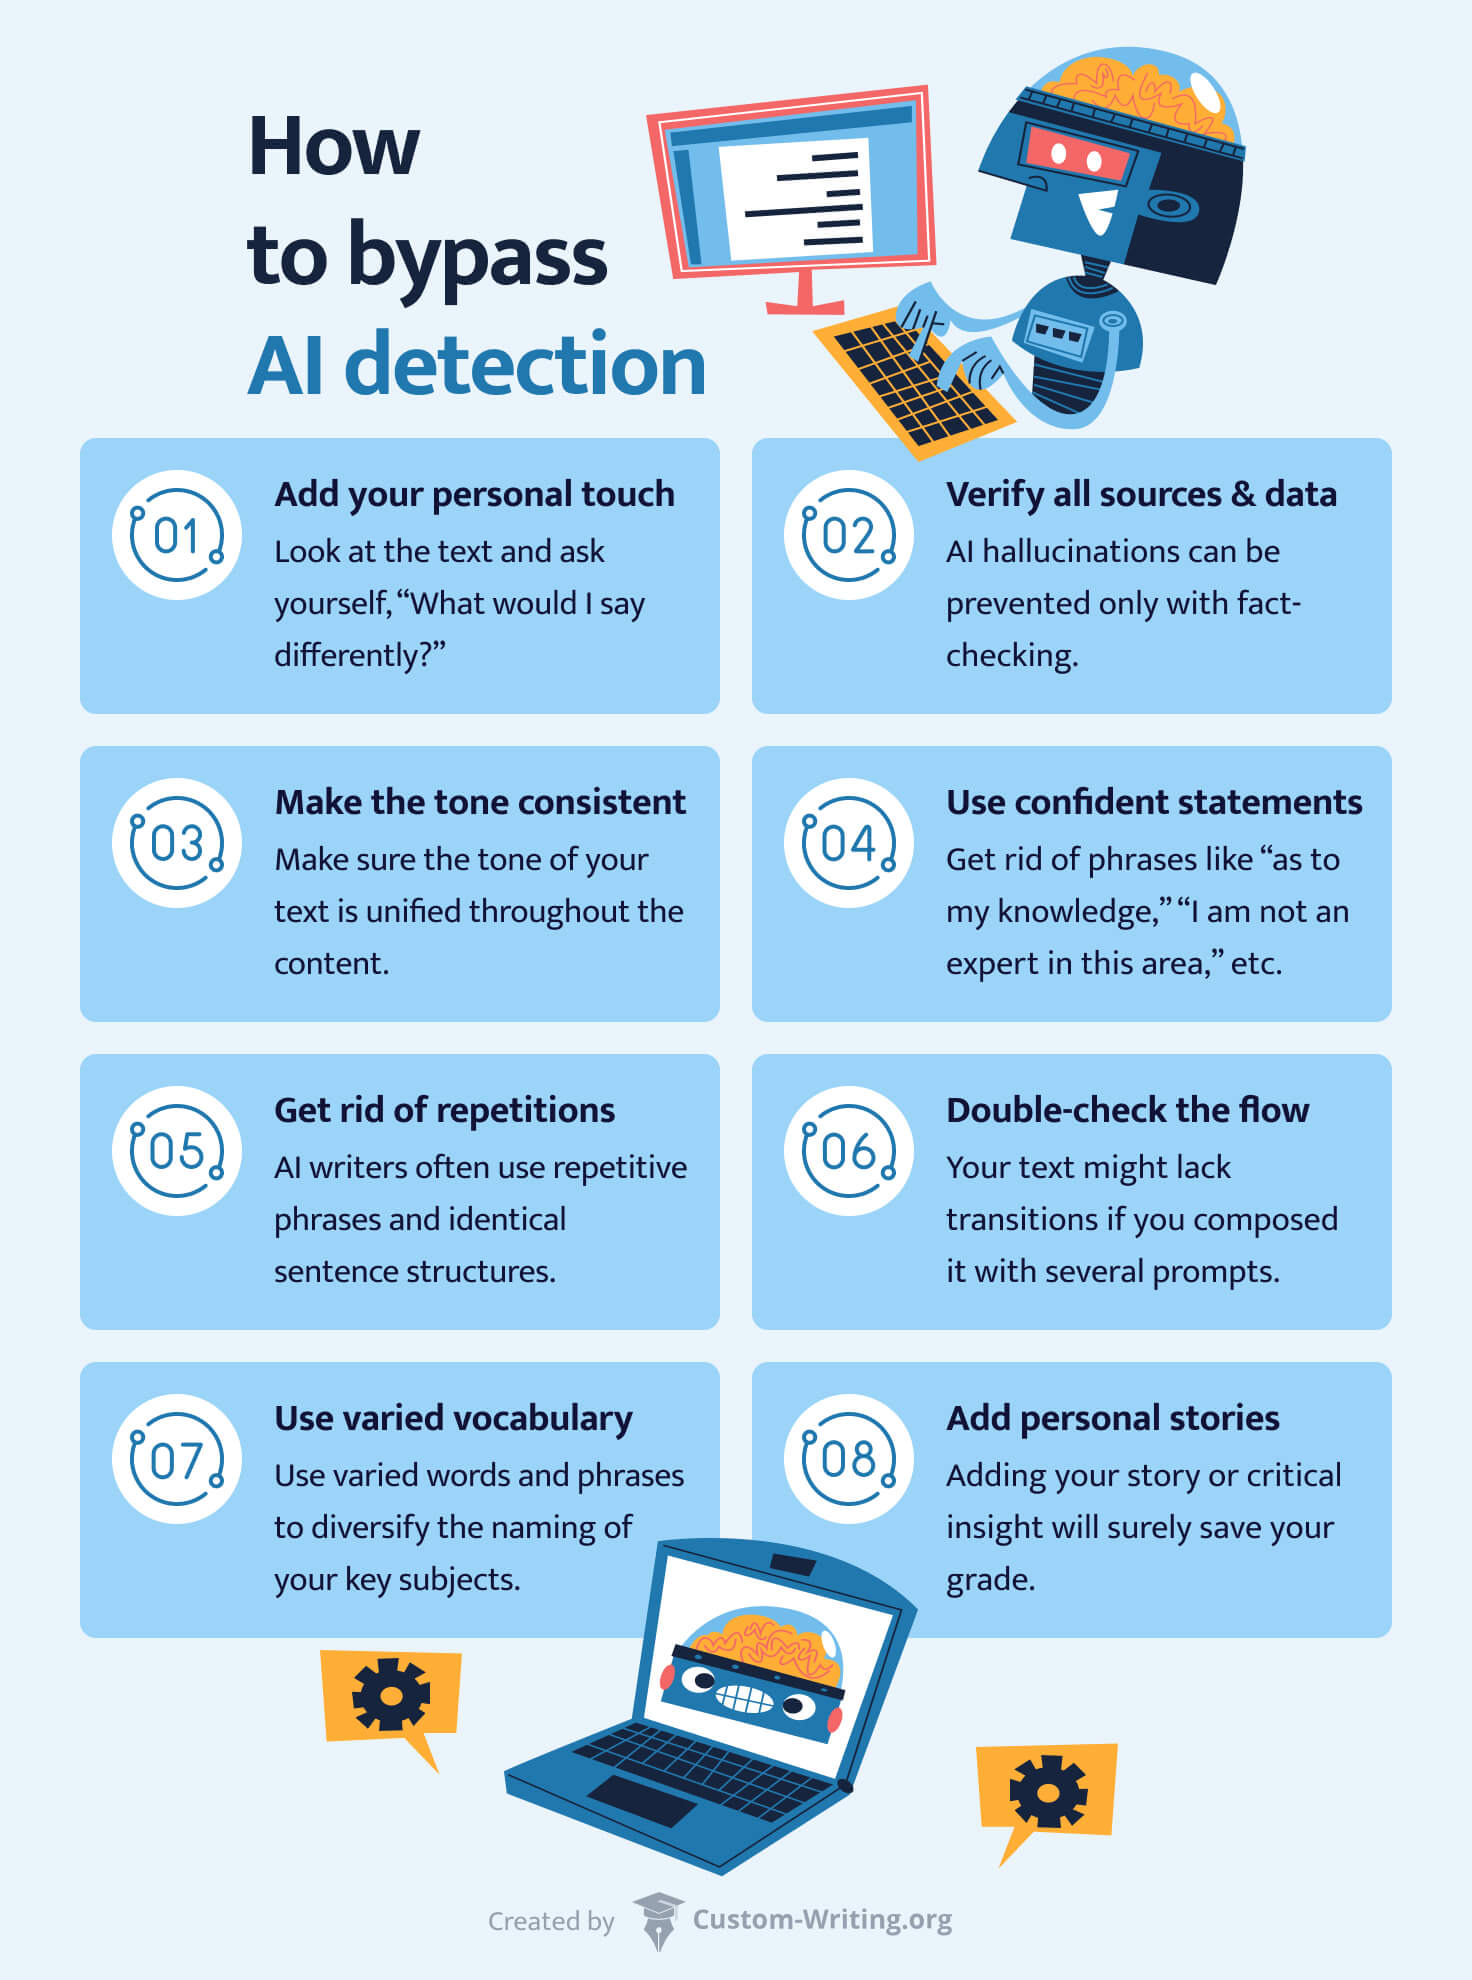 The picture lists the tips to bypass AI detection in writing.